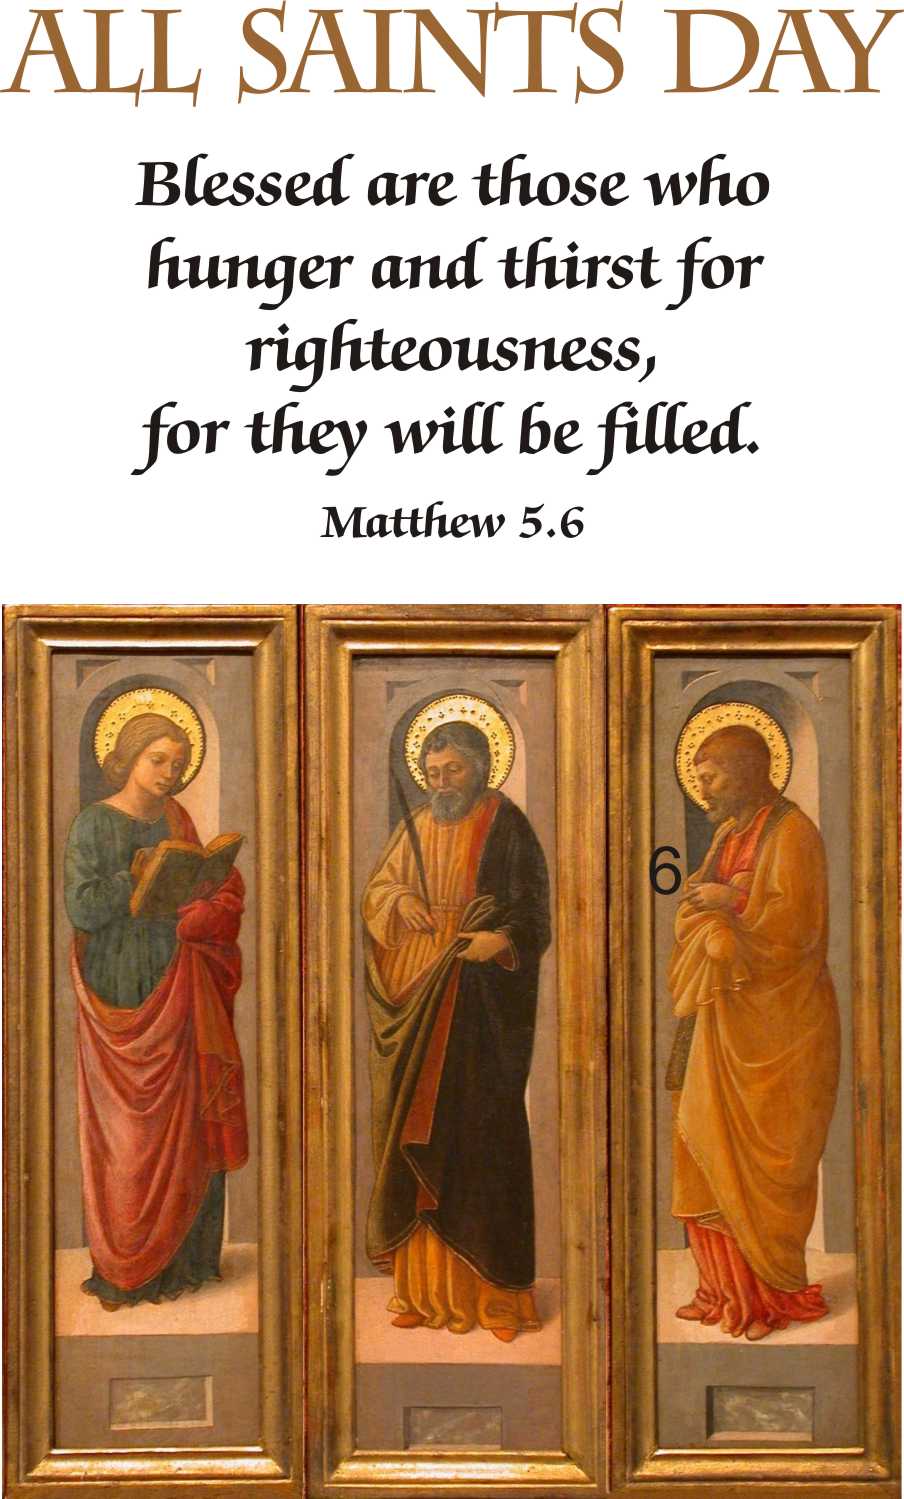 All Saints Day Blessed Are those Who Hunger And Thirst For Righteousness, For They Will be Filled